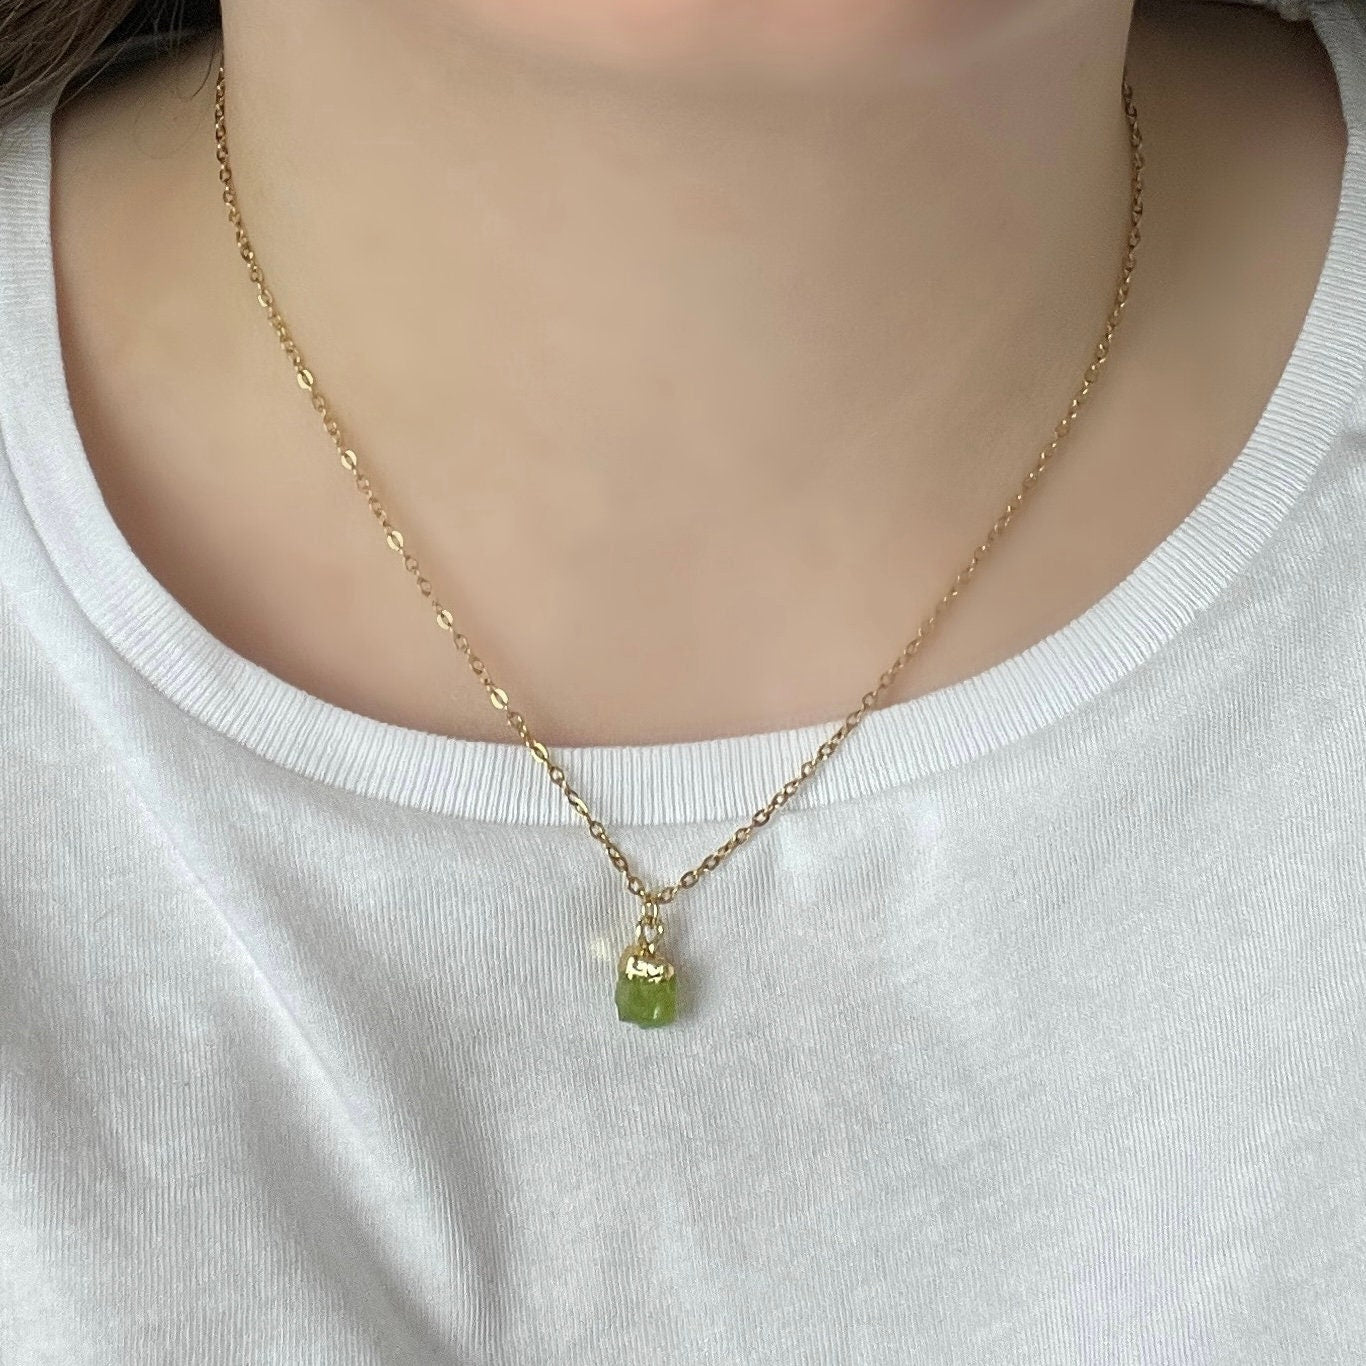 Small Raw Peridot Necklace 18K Gold Stainless Steel Chain